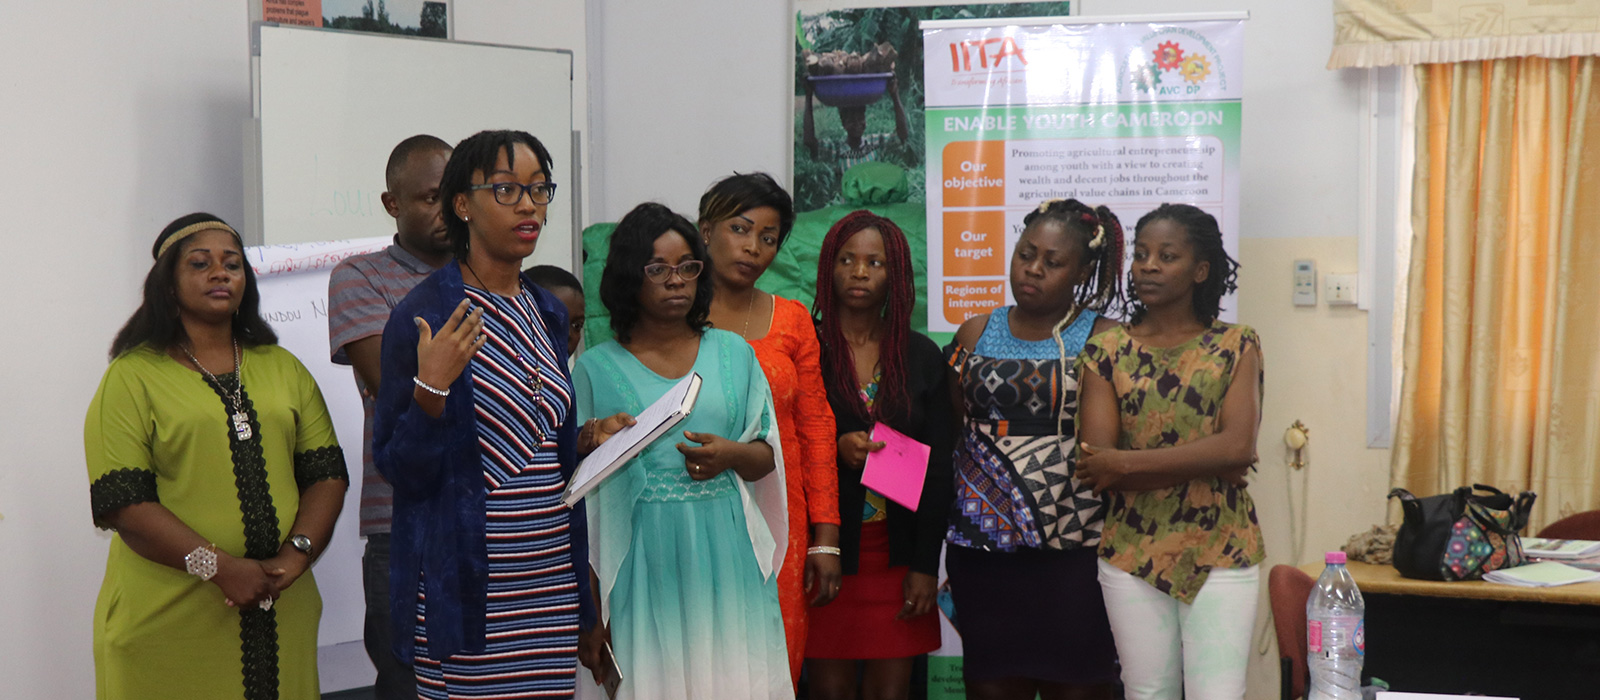 EQUAL OPPORTUNITIES AND ADEQUATE SKILLS TO YOUNG WOMEN